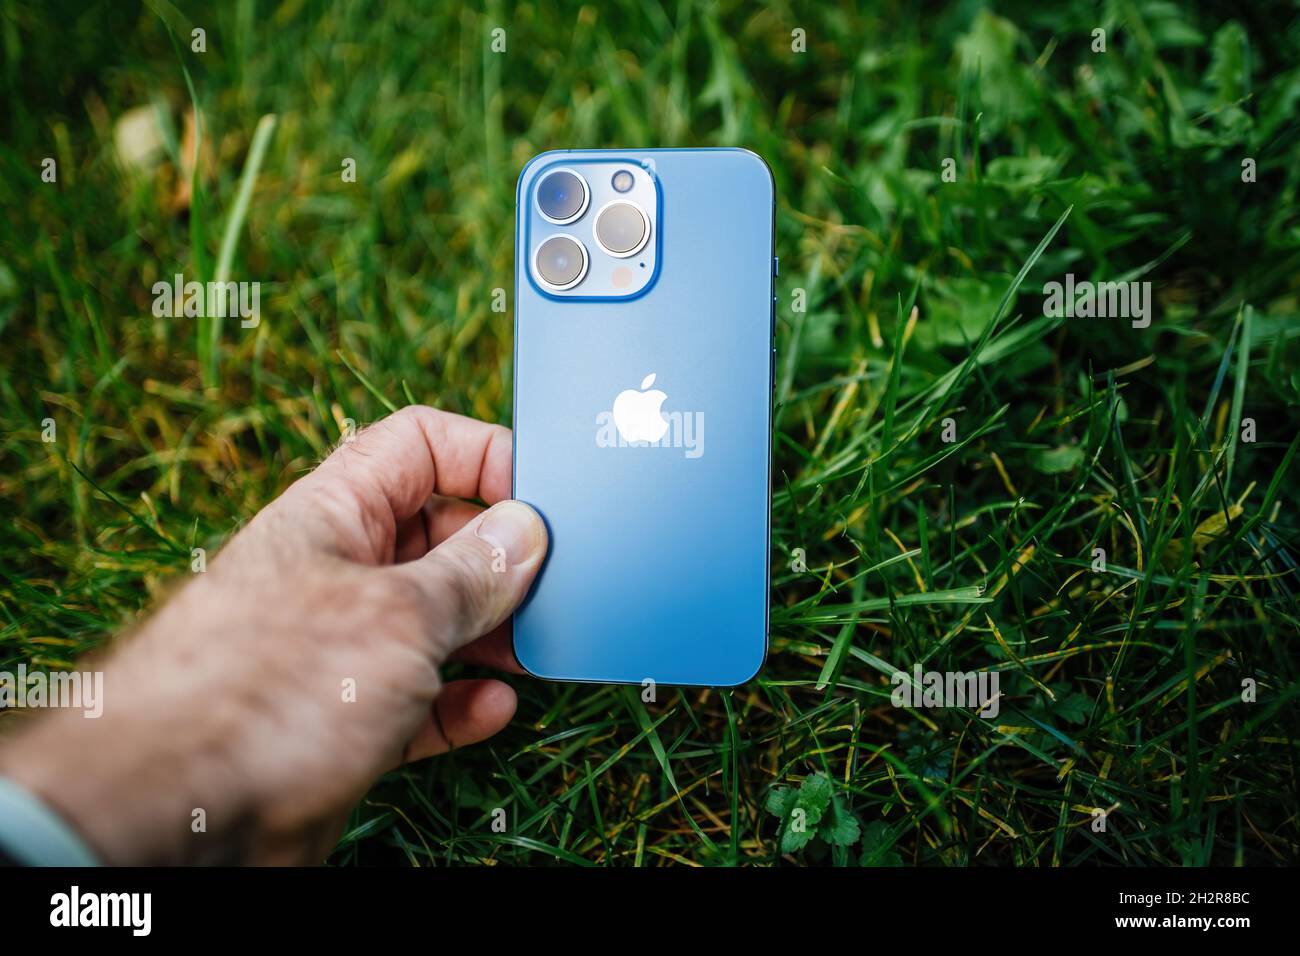 Apple Computers iPhone 13 pro with all three rear cameras and lidar sensor in green garden grass background environmentally friendly Stock Photo